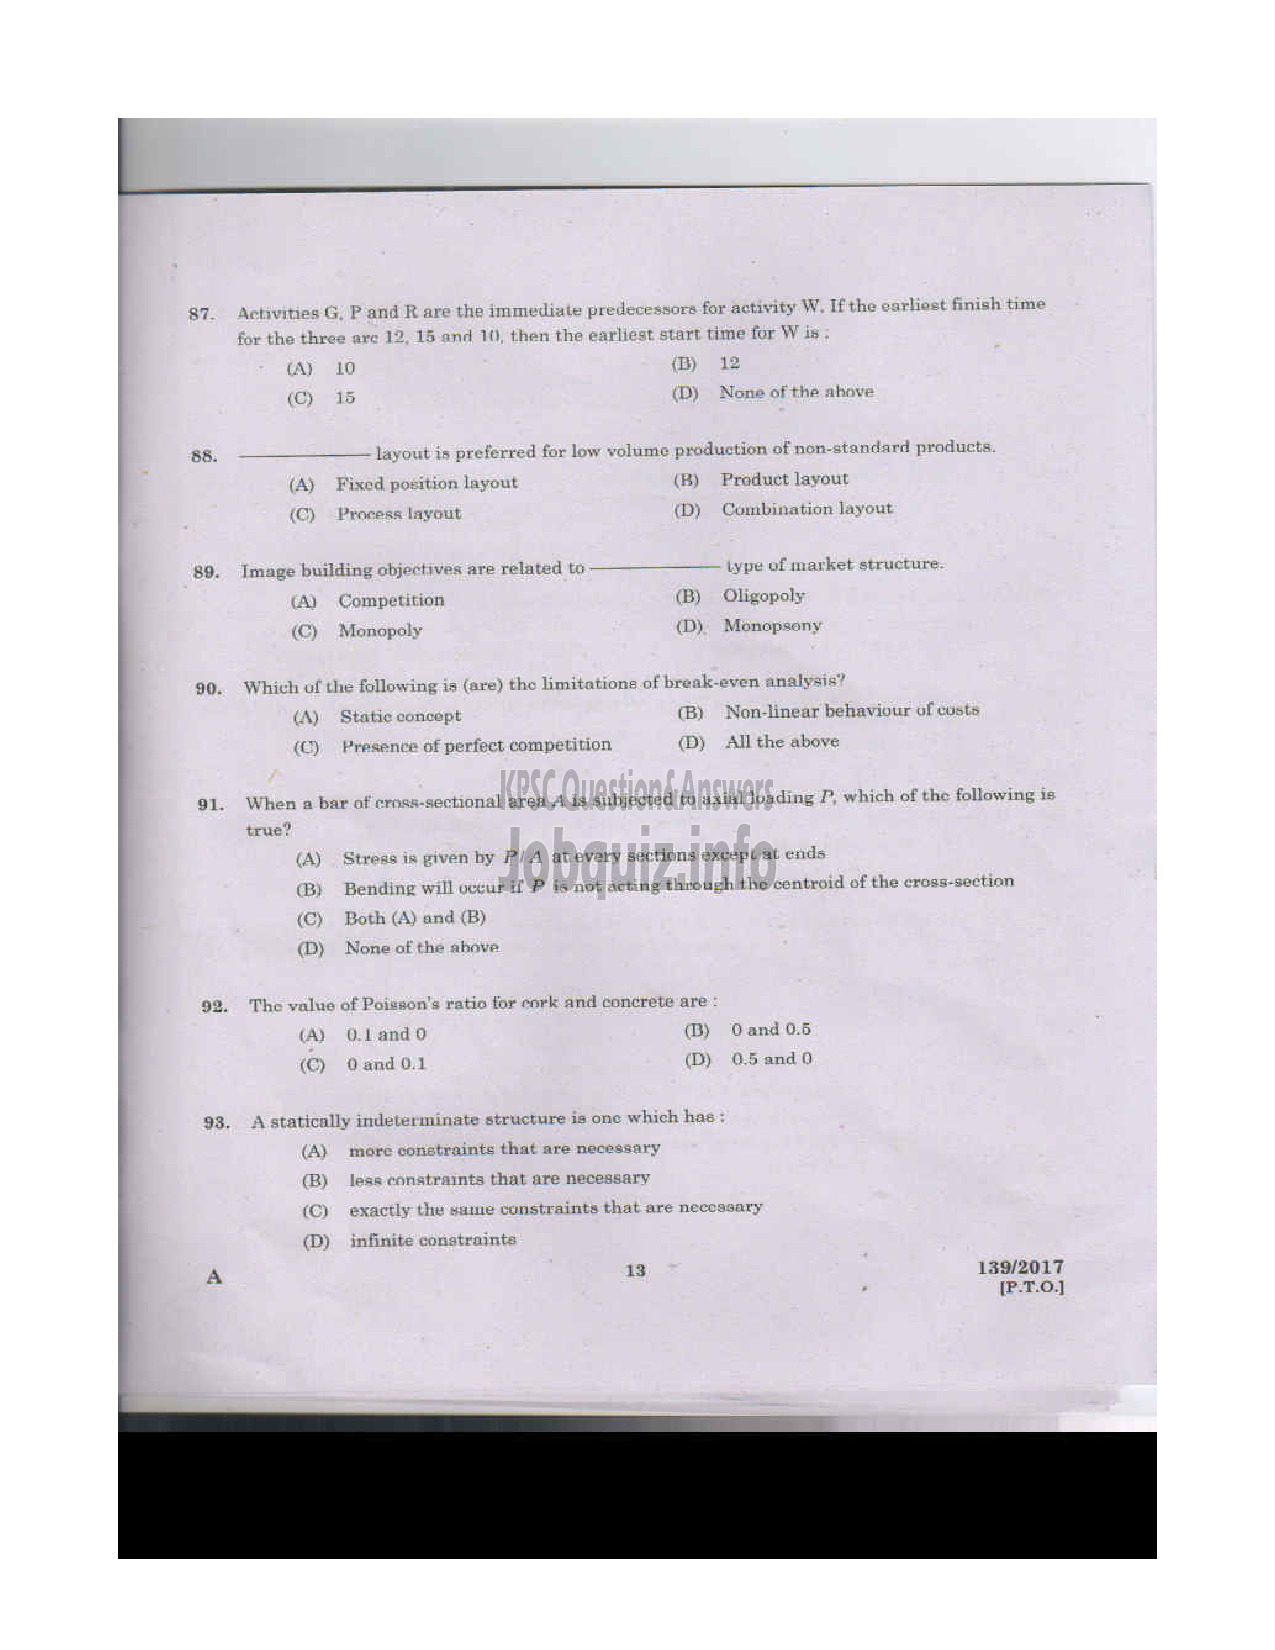 Kerala PSC Question Paper - ASSISTANT ENGINEER GROUND WATER DEPARTMENT-12